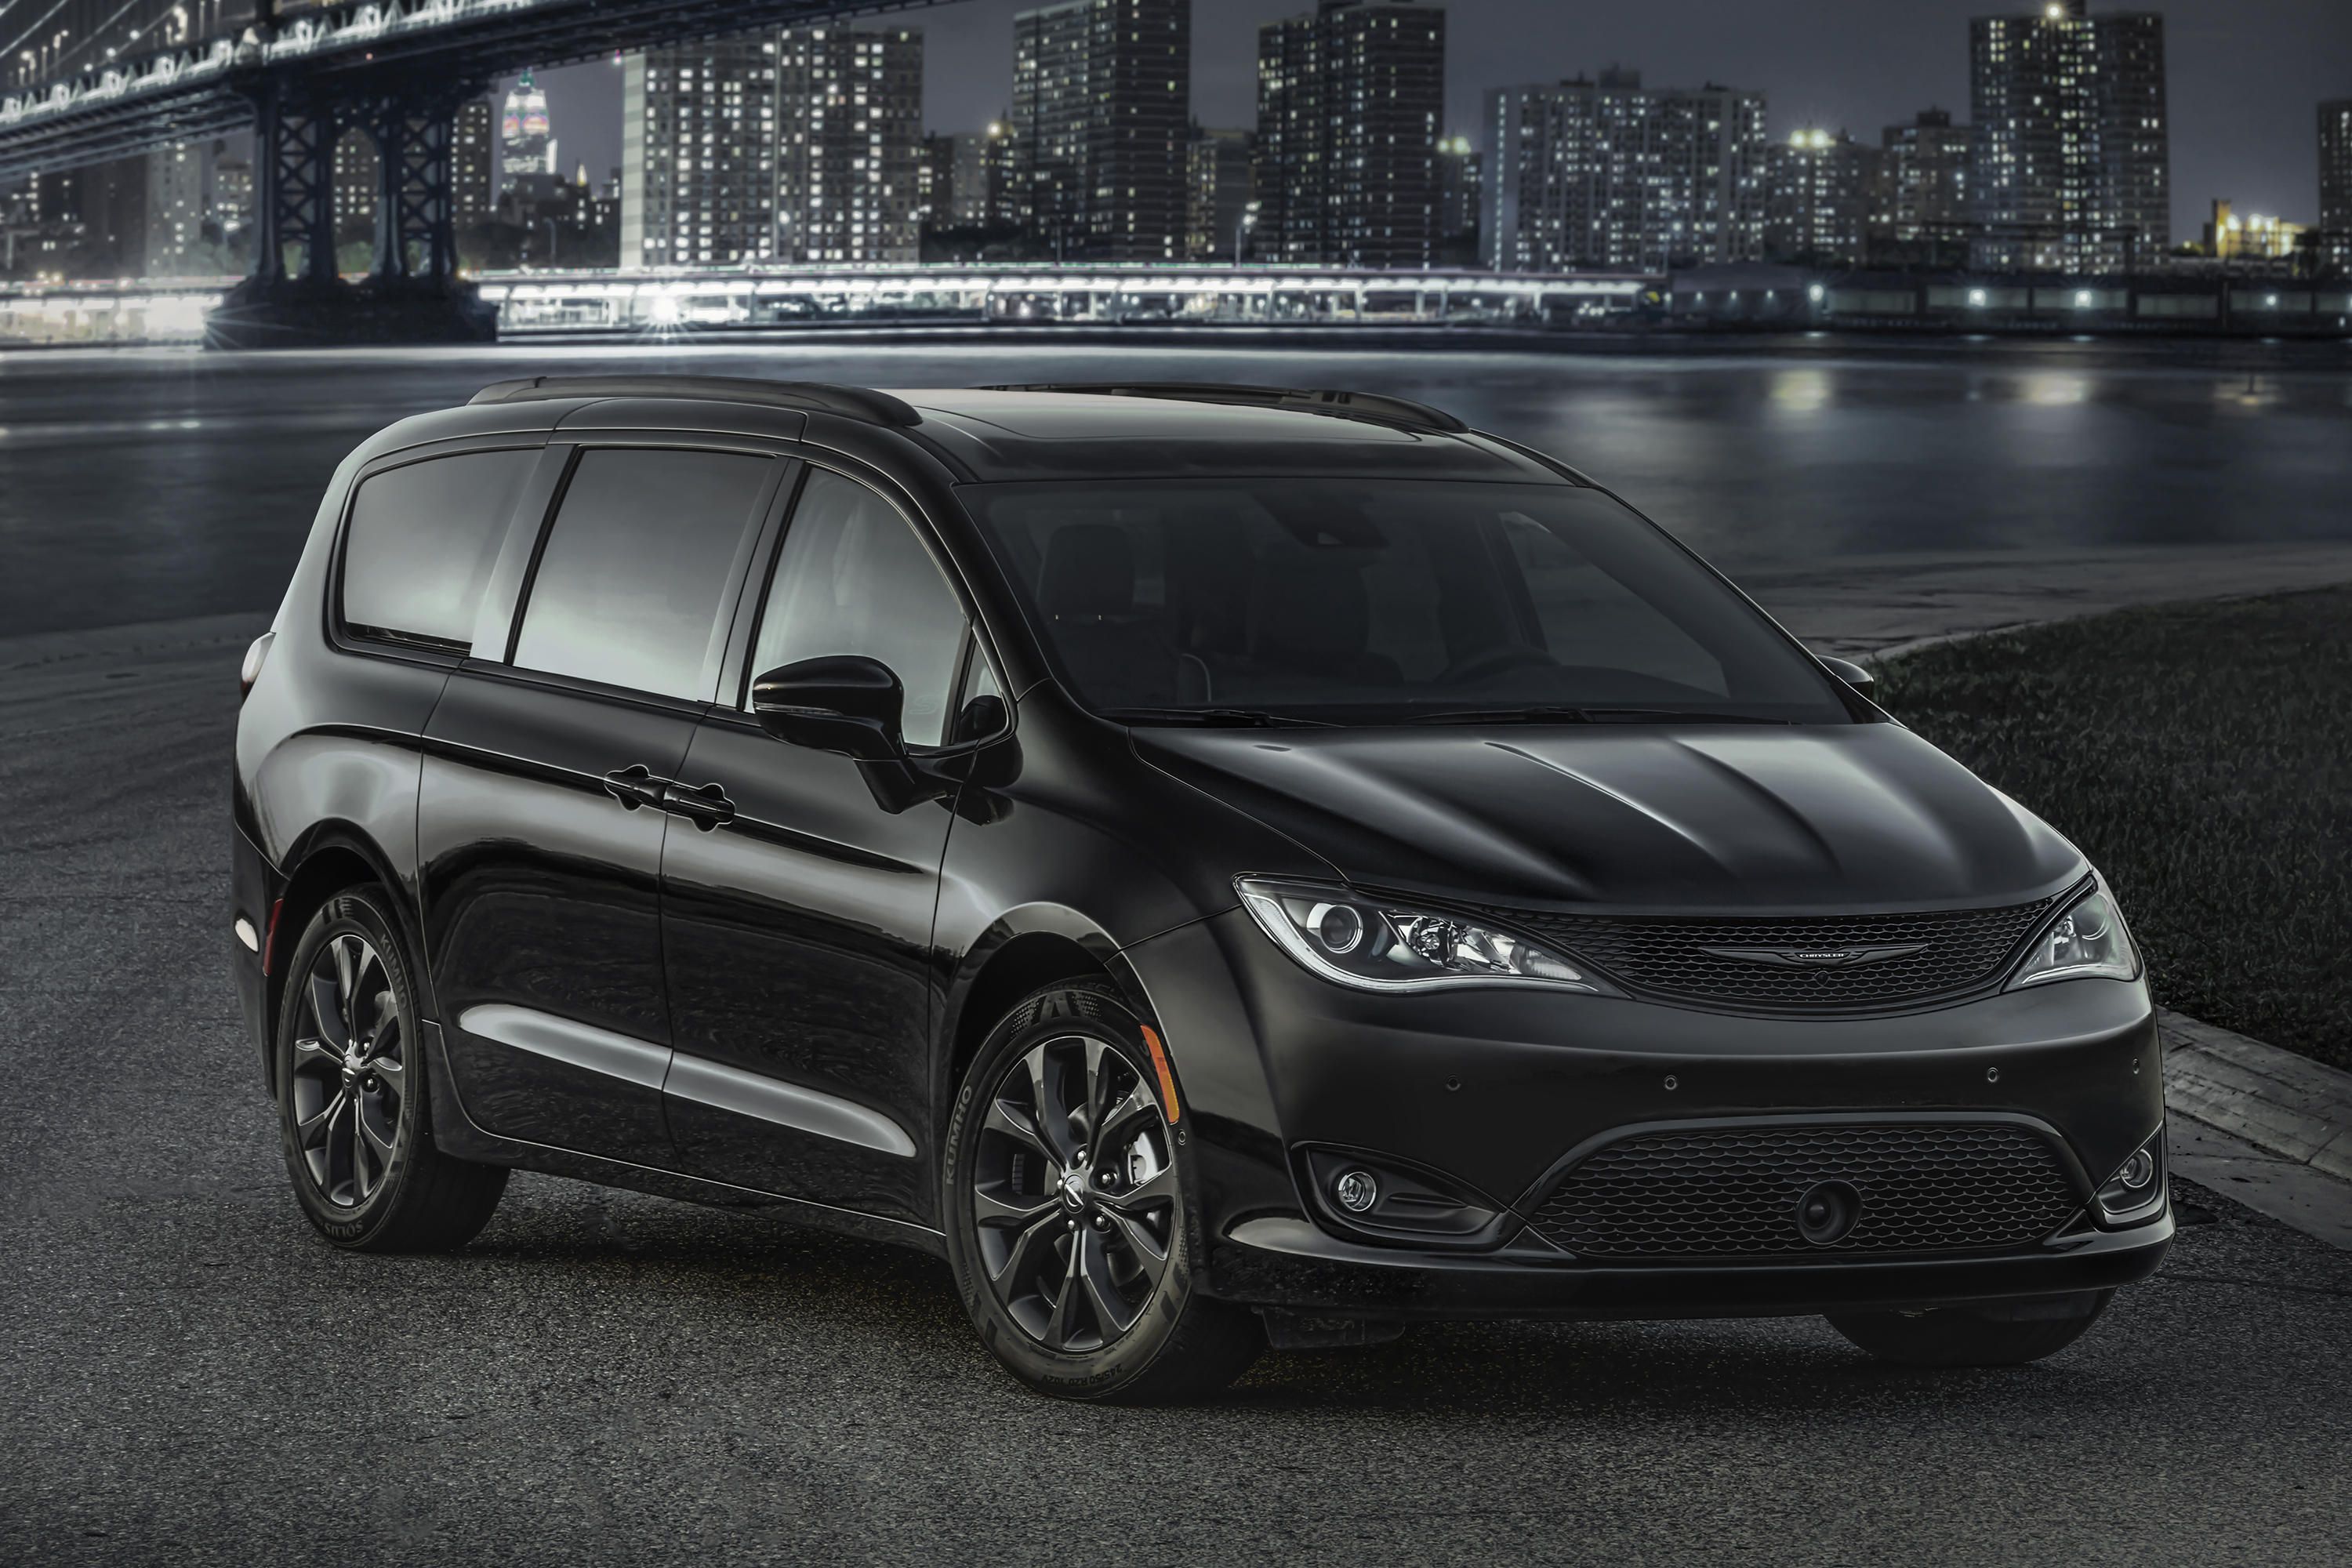 Chrysler Pacifica hd restyling